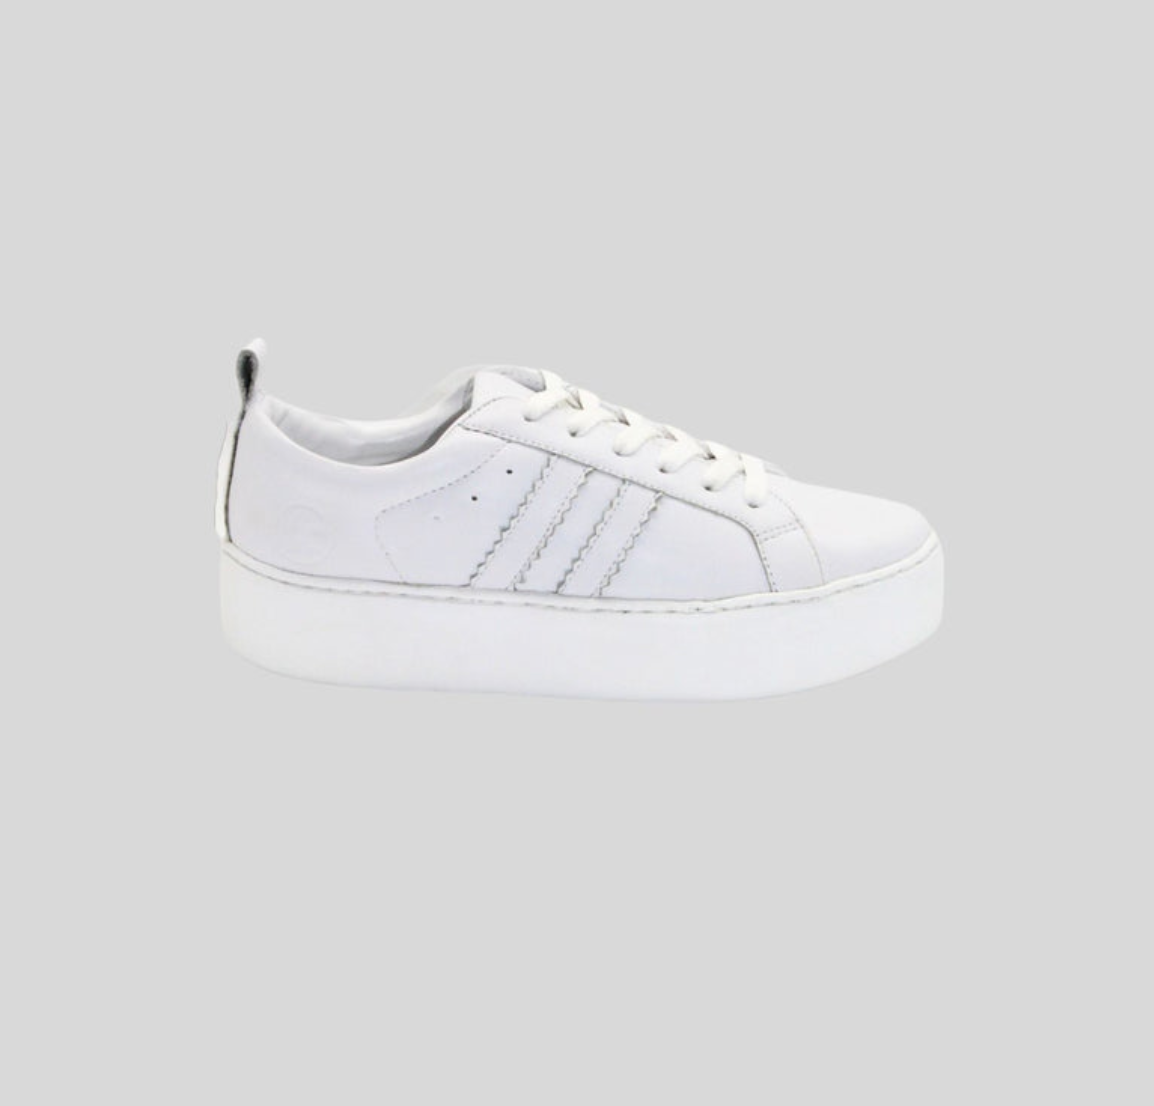 Cult - White Sneaker Shoes